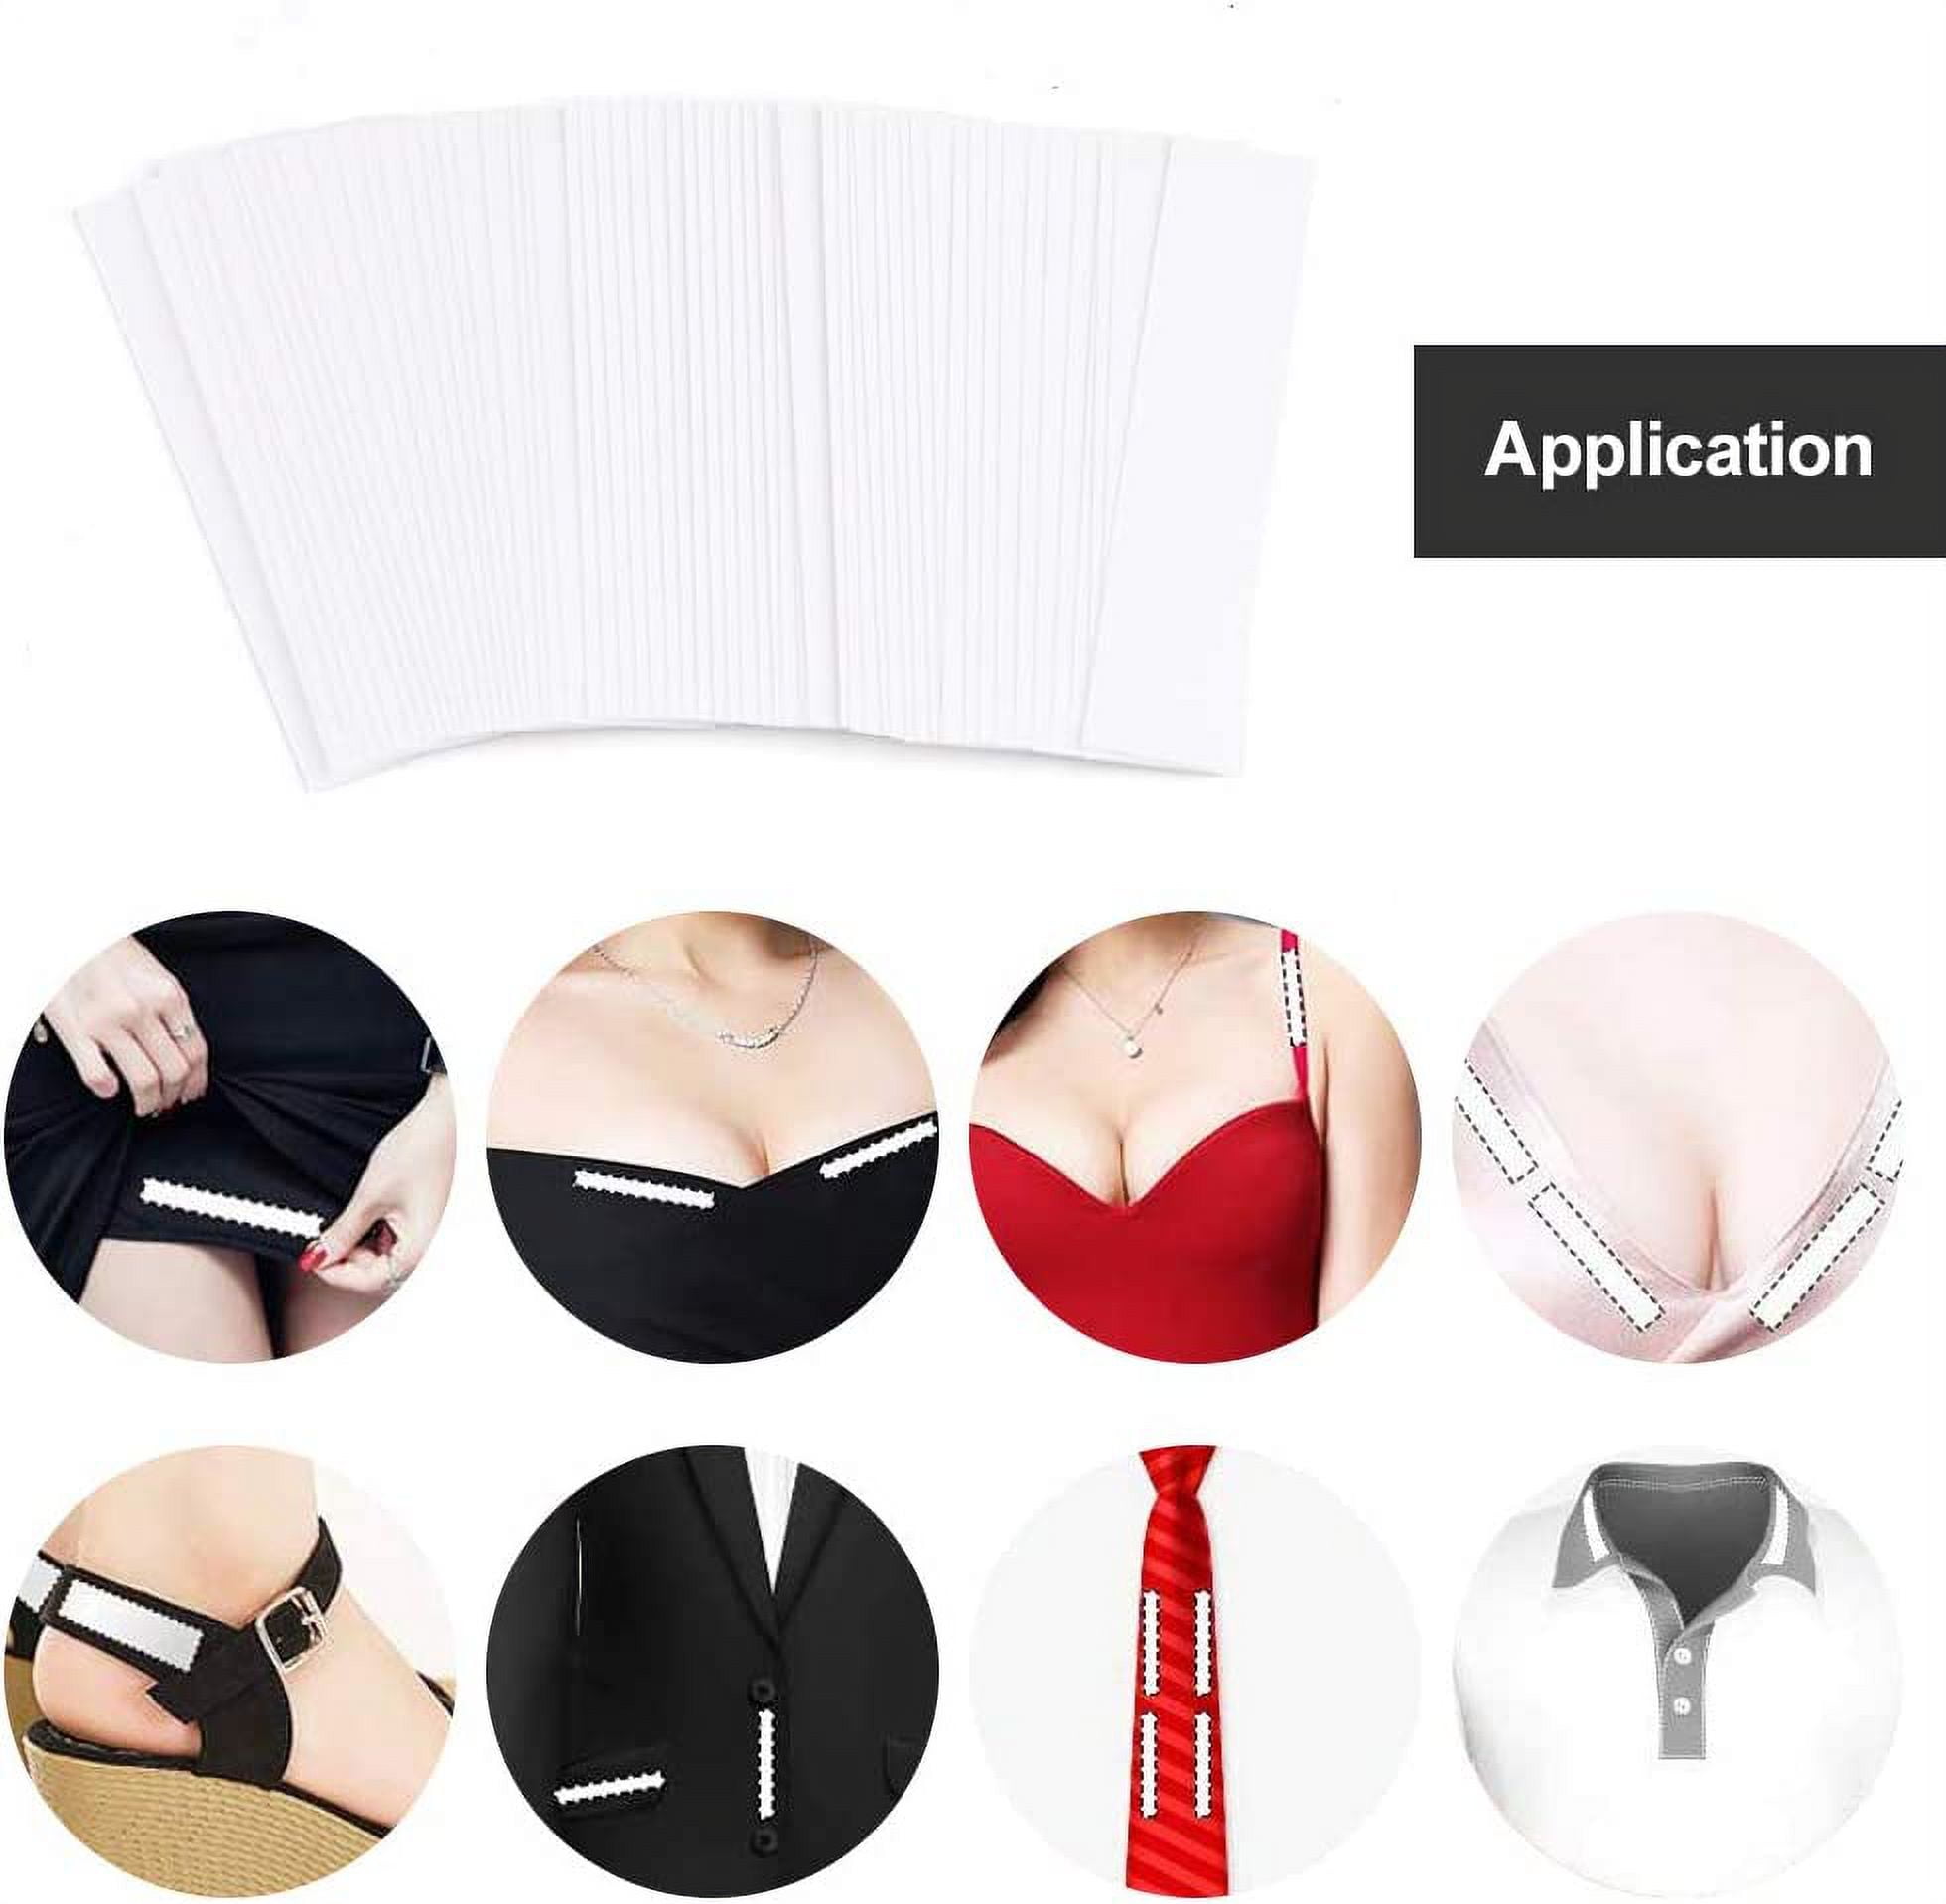 Professional Medical Double-sided Paste Underwear Shirt Clothes